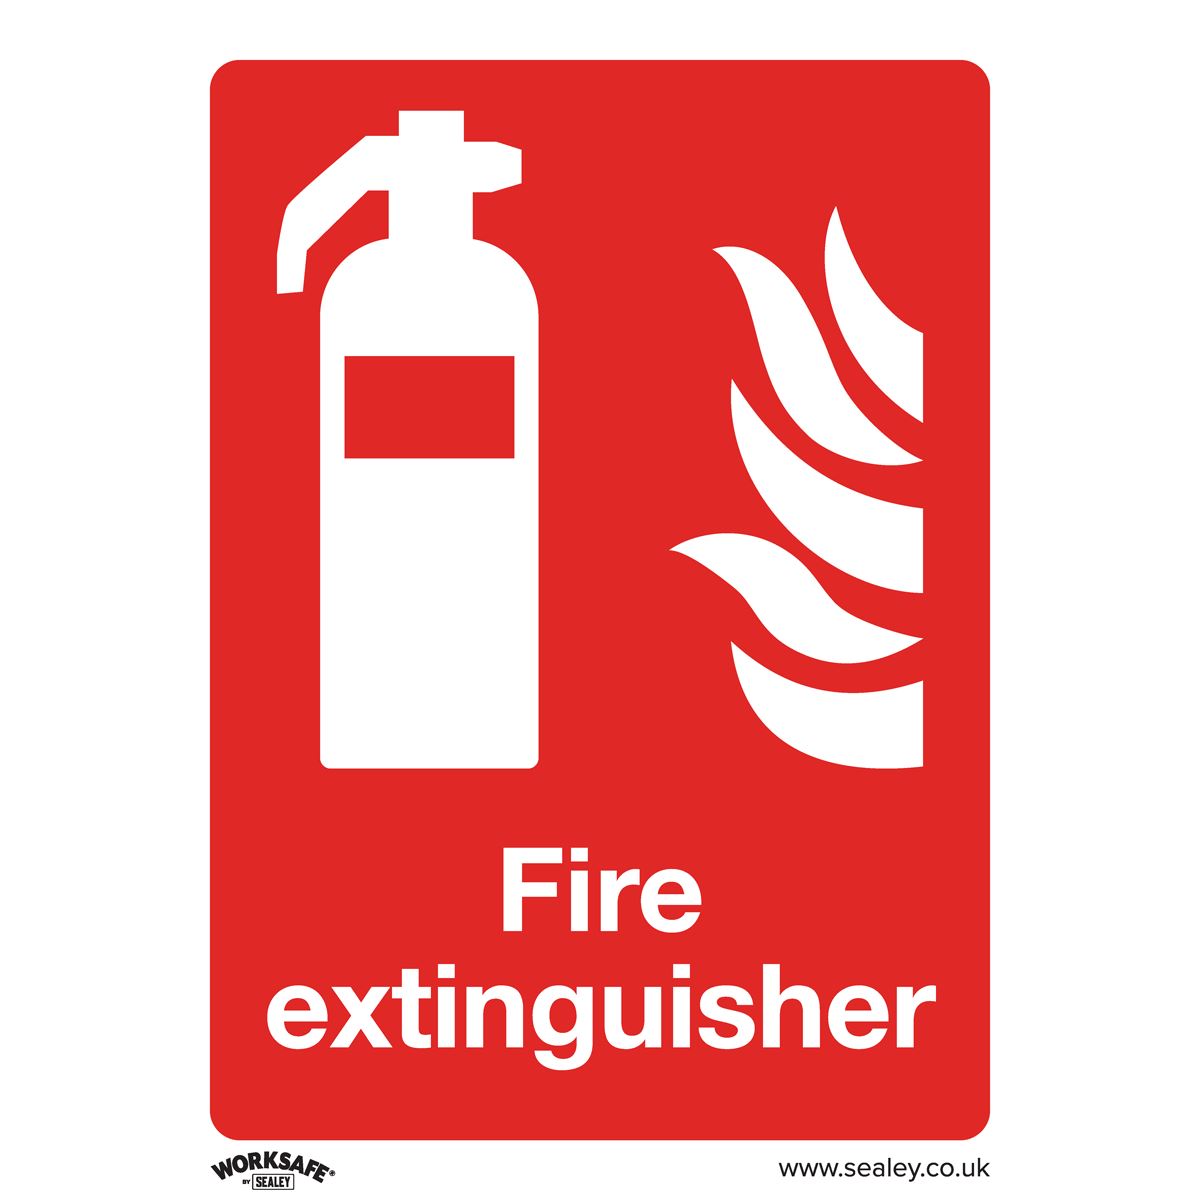 Worksafe by Sealey Prohibition Safety Sign - Fire Extinguisher - Self-Adhesive Vinyl